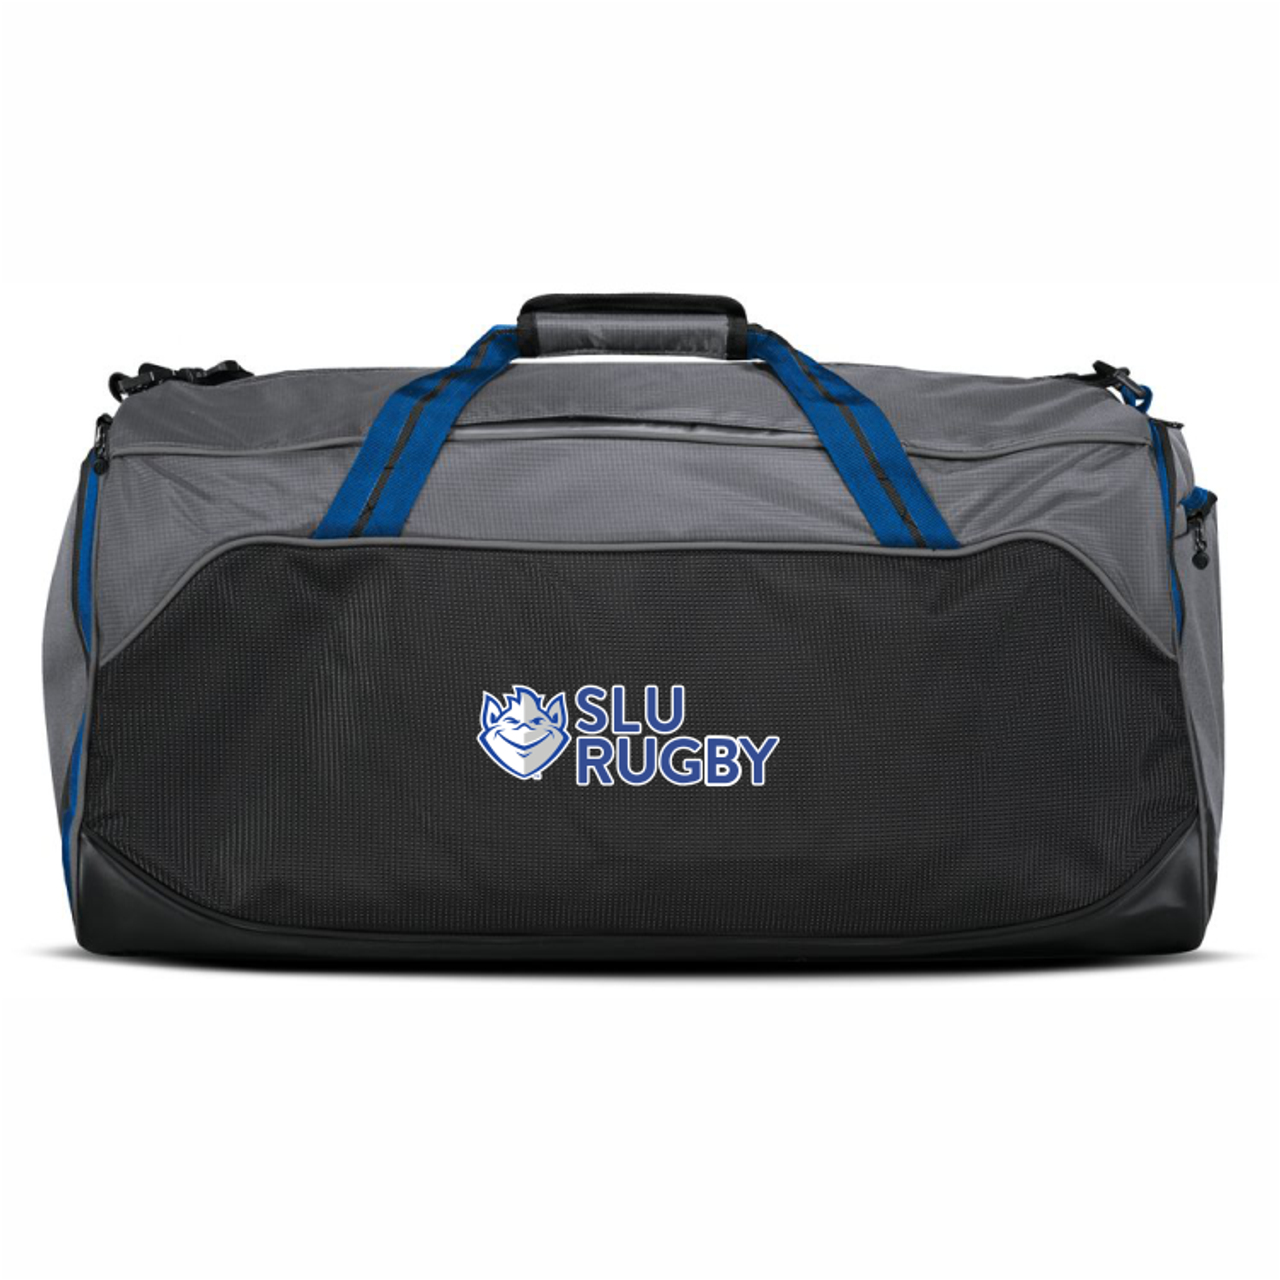 Florida Panthers Rugby Duffle Bag